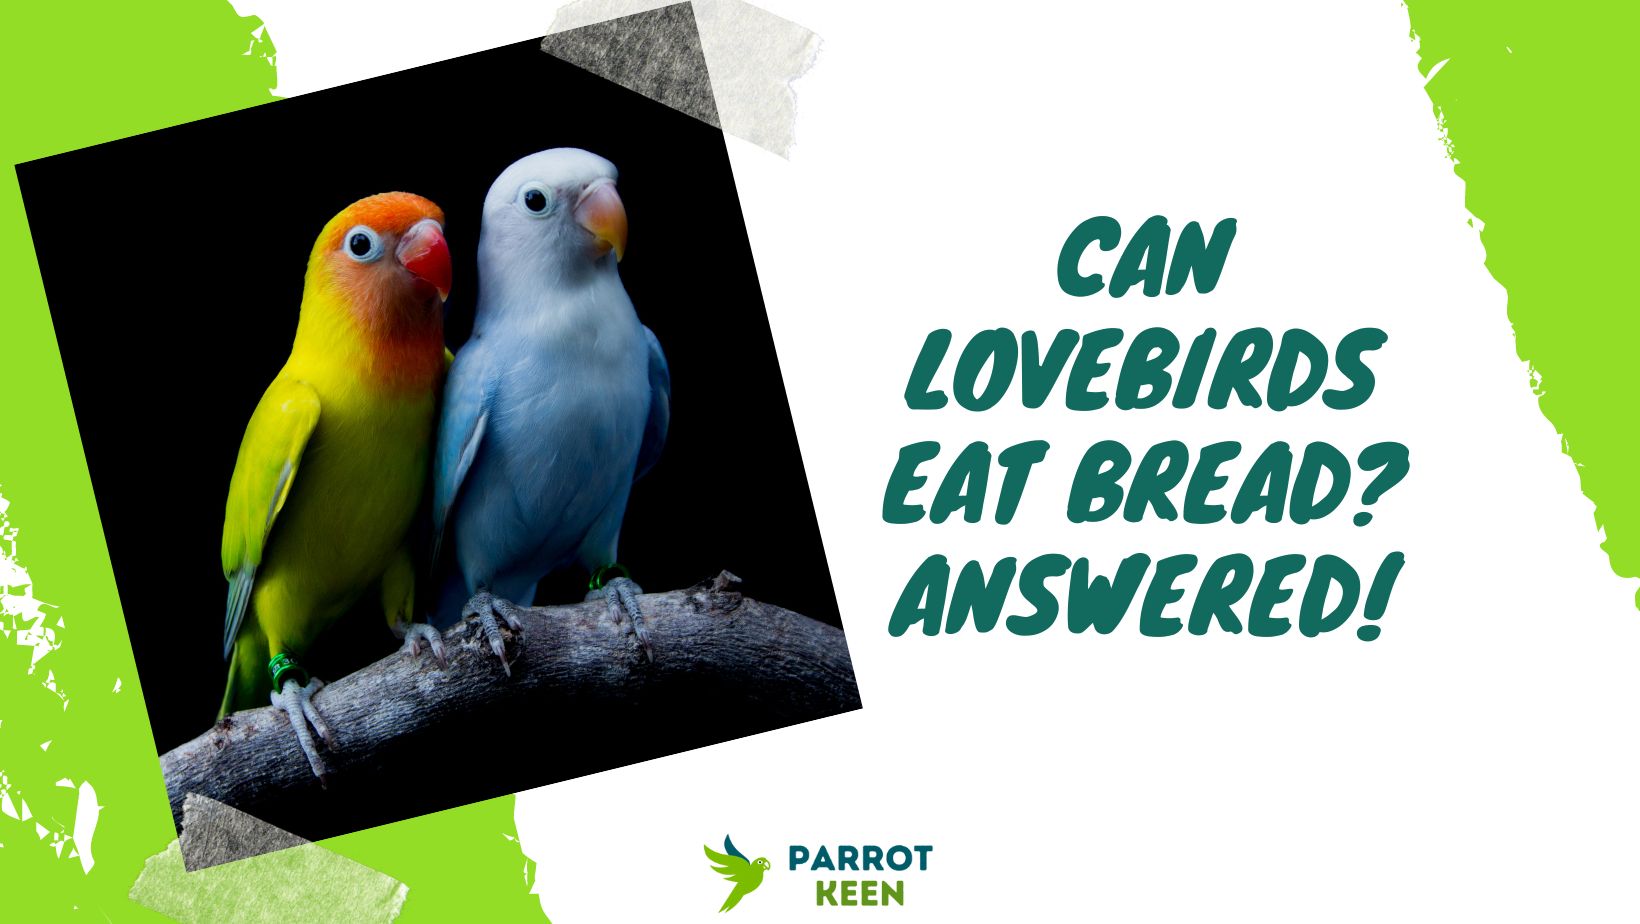 Can Lovebirds Eat Bread Answered!